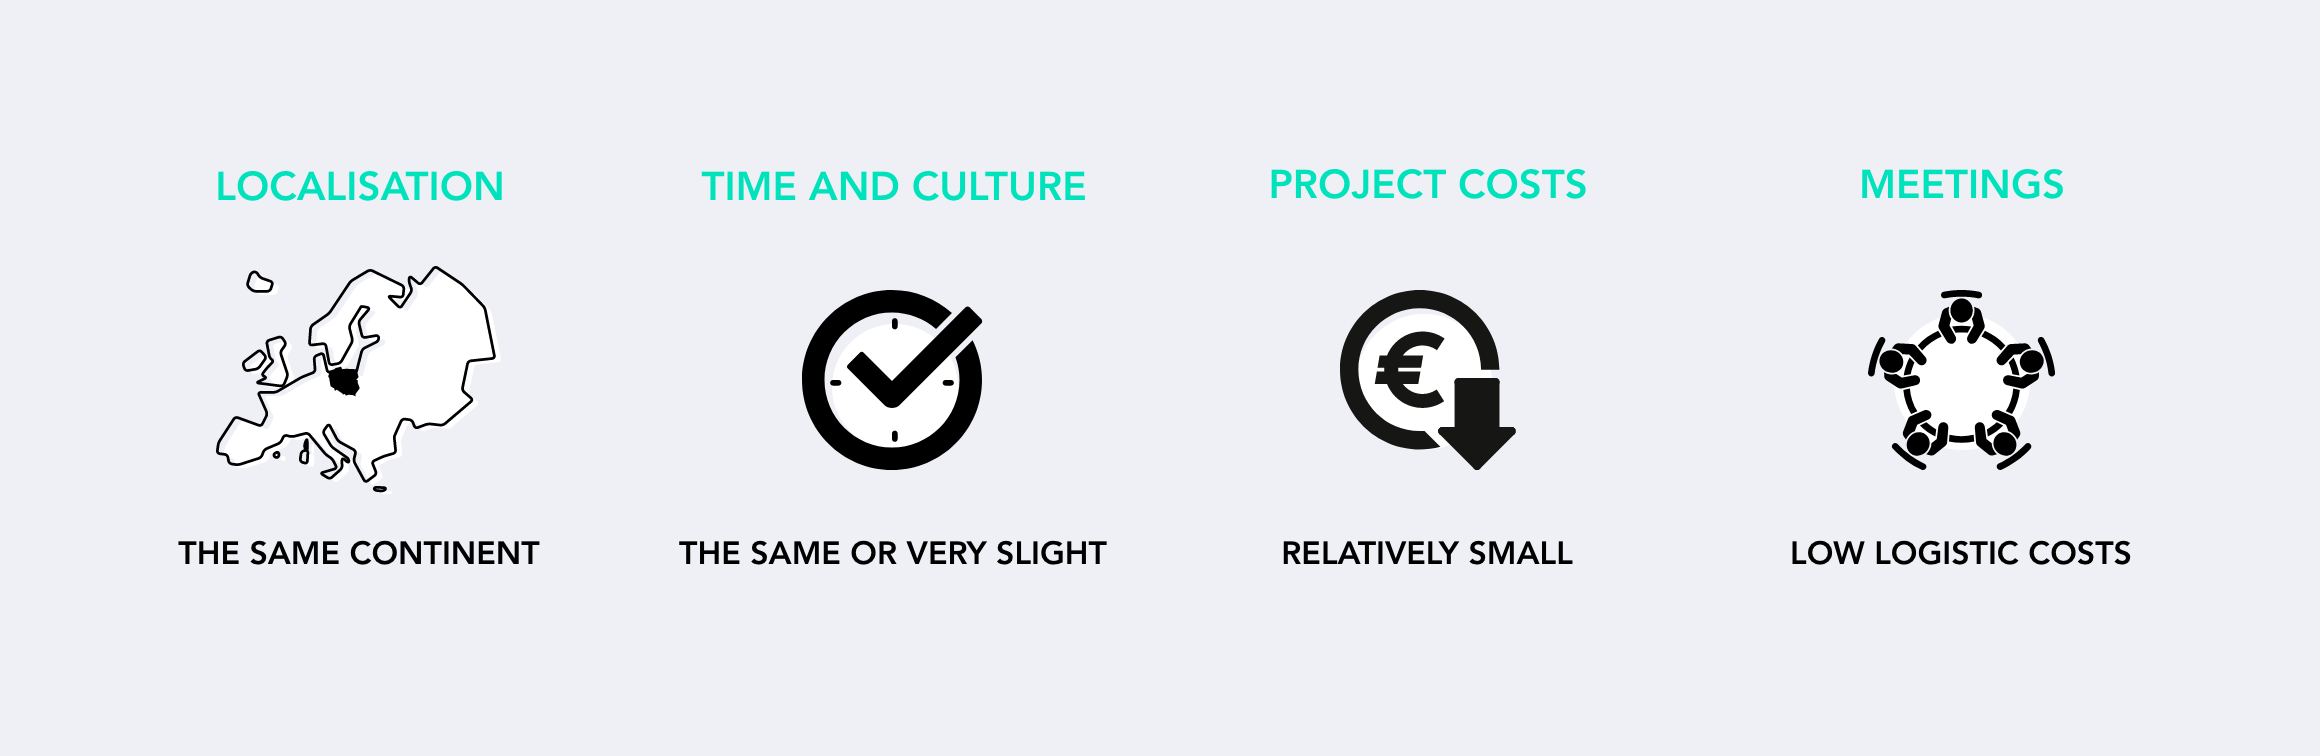 nearshore benefits: the same continent, the same time and culture, relatively small project costs, low logistic costs